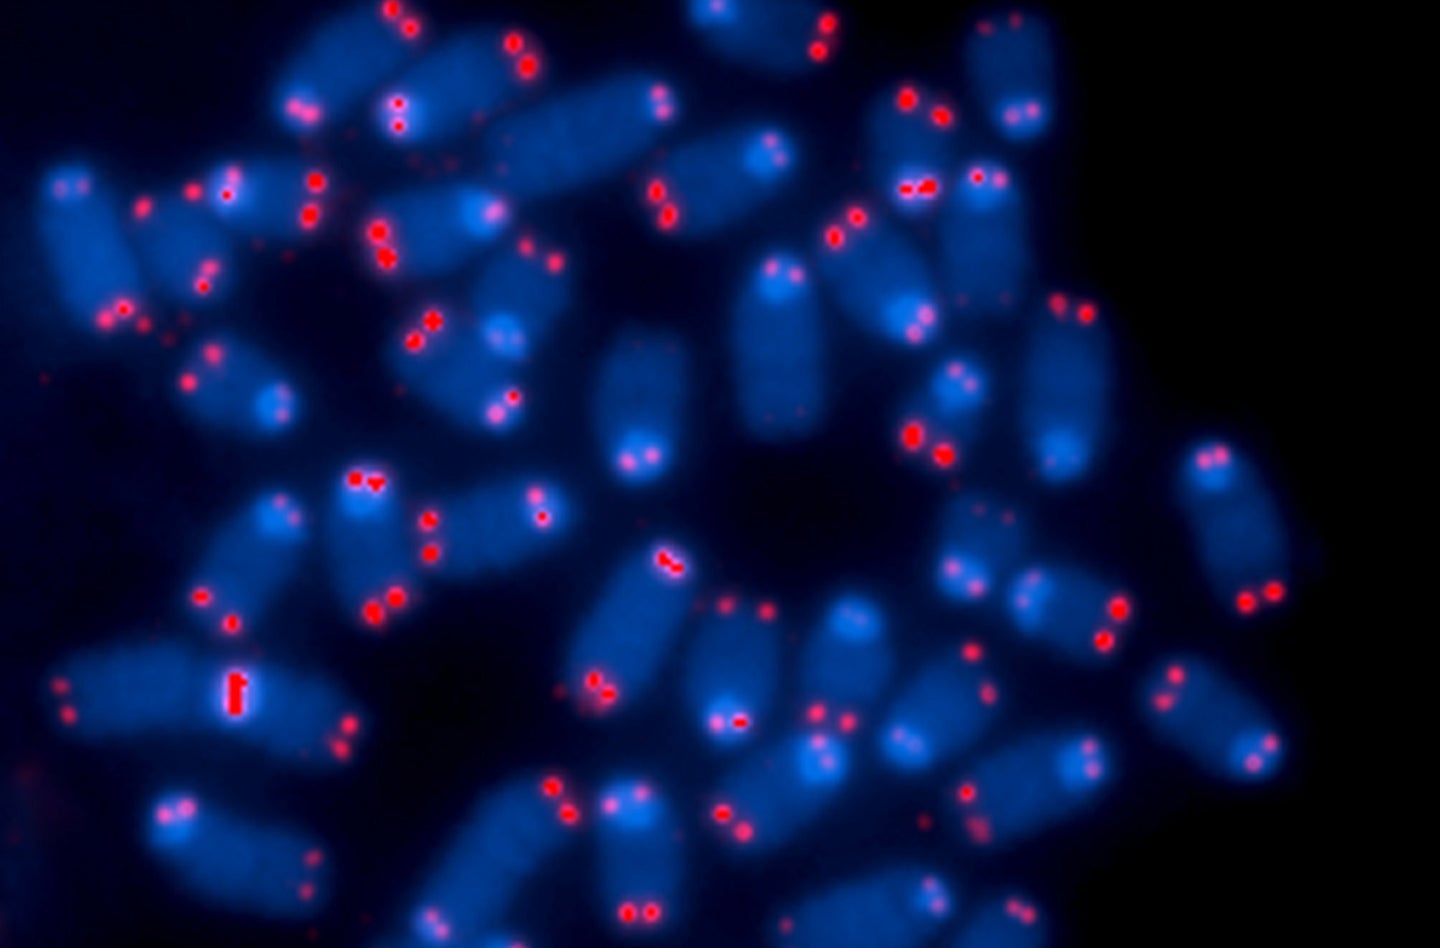 Blue oblong shapes marked with red dots against a background.